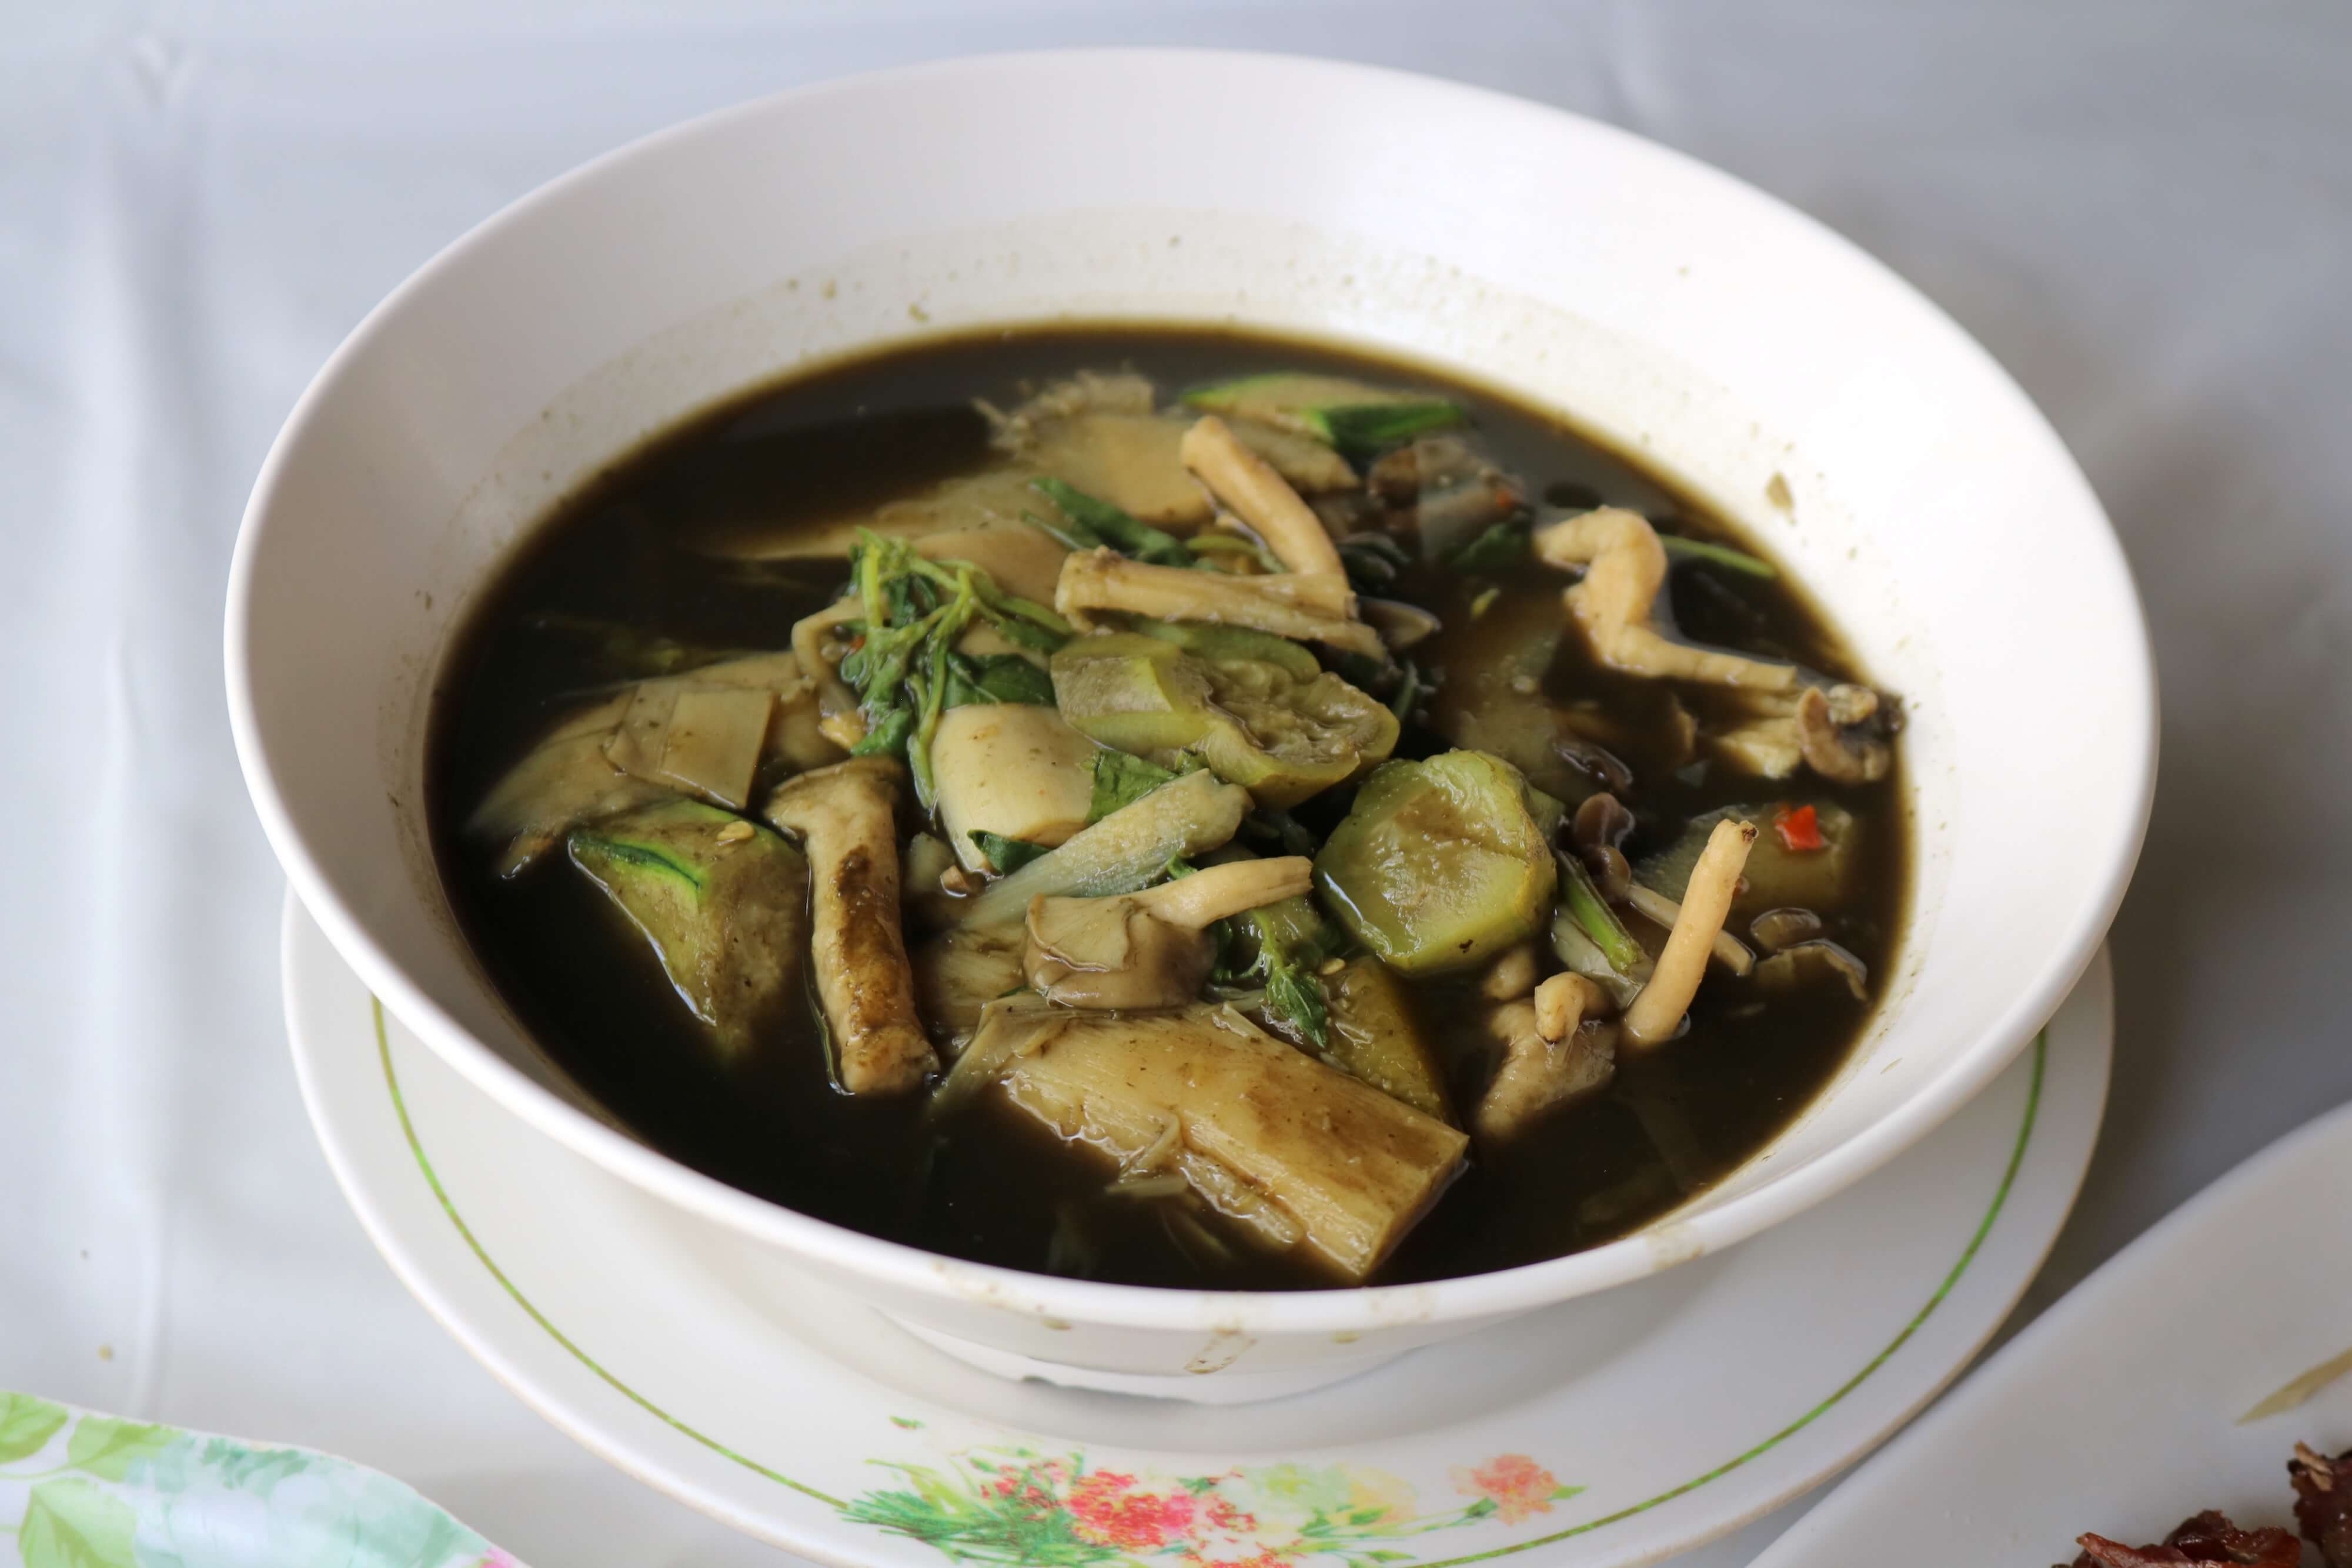 A very healthful mix of herbs and vegetables goes into every bowl of Bamboo Curry